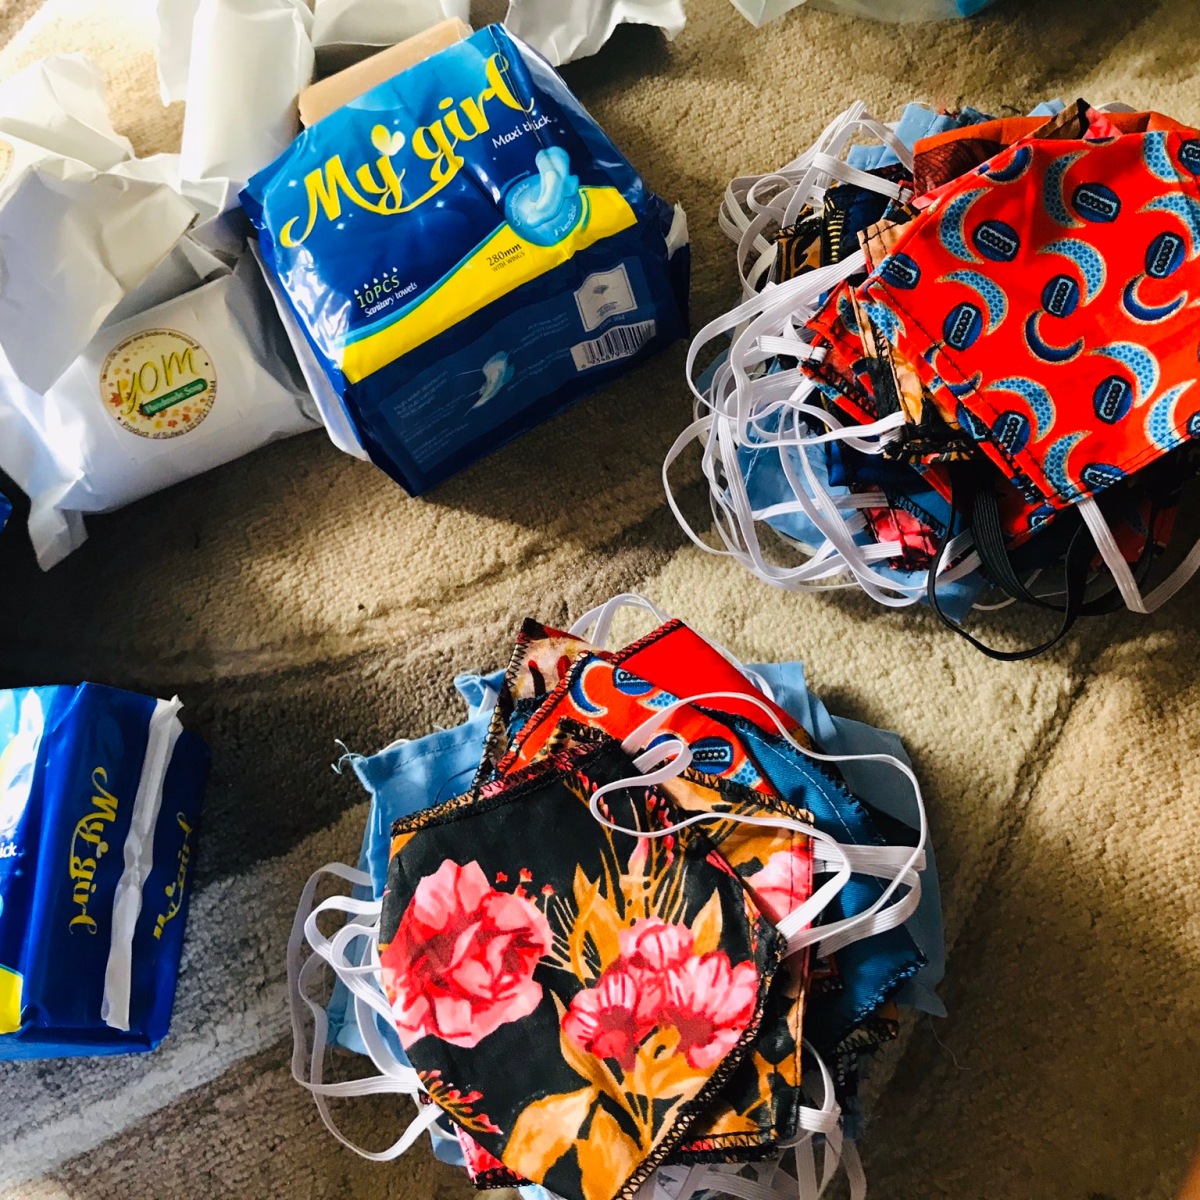 Face masks, pads, and liners received during the Covid-19 aid drive.